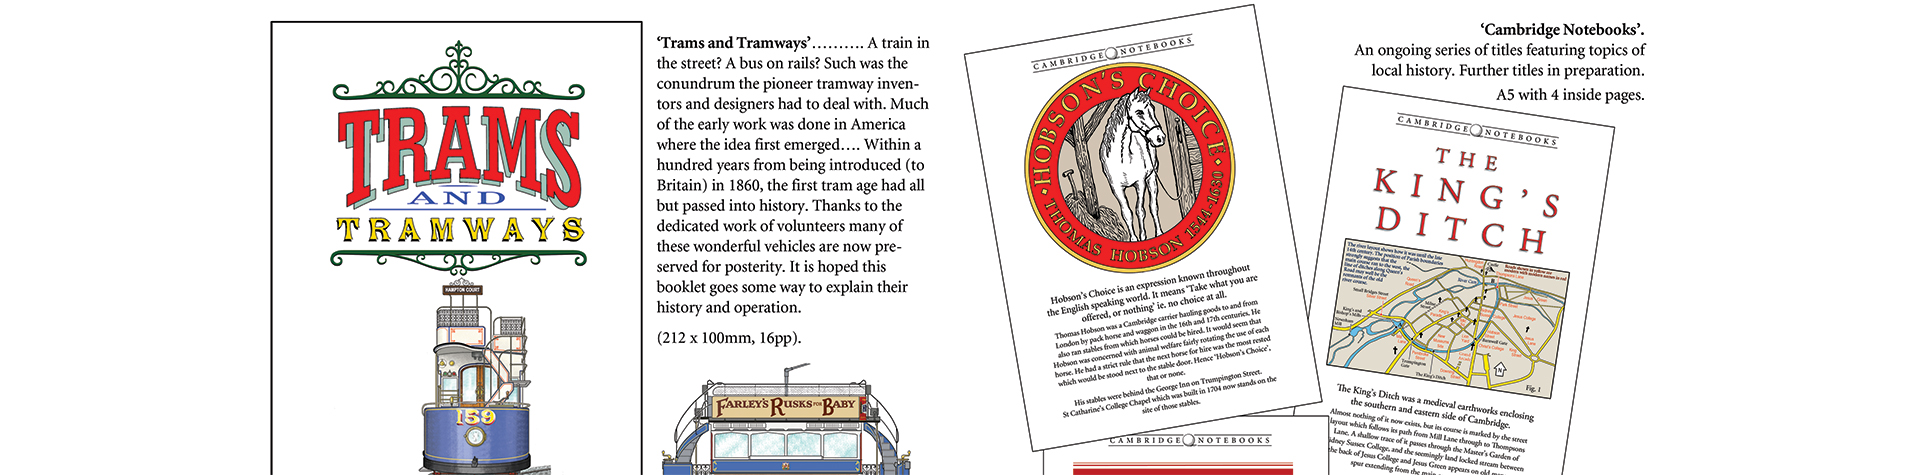 ‘Trams and Tramways’………. A train in the street? A bus on rails? Such was the conundrum the pioneer tramway inventors and designers had to deal with. Much of the early work was done in America where the idea first emerged…. Within a hundred years from being introduced (to Britain) in 1860, the first tram age had all but passed into history. Thanks to the dedicated work of volunteers many of these wonderful vehicles are now preserved for posterity. It is hoped this booklet goes some way to explain their history and operation.
(212 x 100mm, 16pp).
Jeremy Bays Illustrator